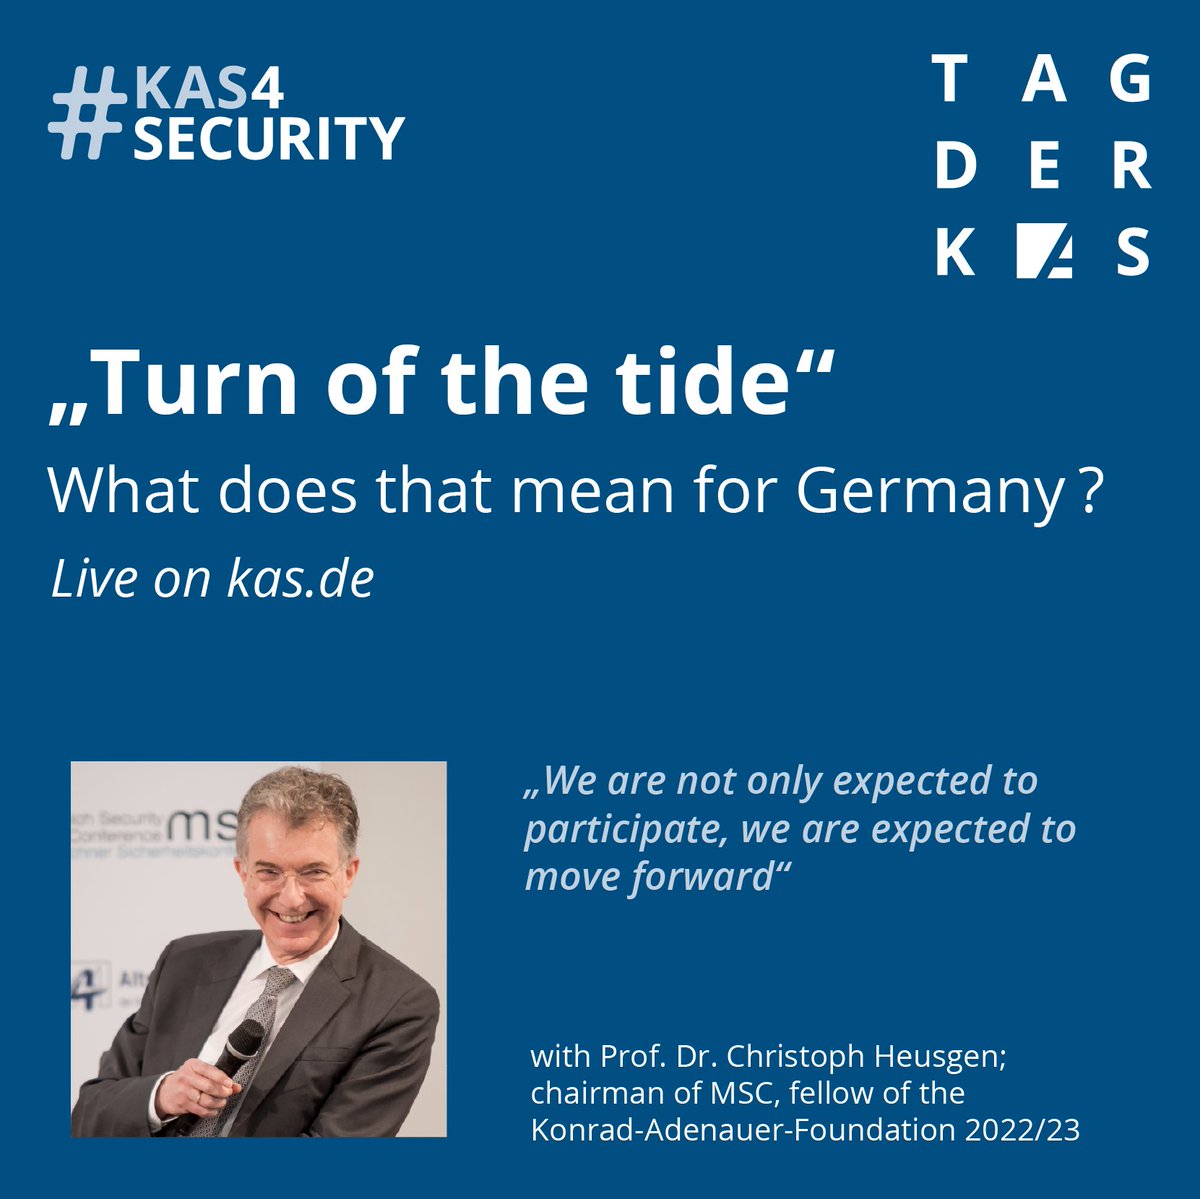 In order to be able to stand up for #peace, #security, #democracy & #humanrights worldwide, German #securitypolicy must be rethought. @MSCheusgen discusses which mindset is required at #TAGderKAS.
🎥 Join the live discussion! #KAS4Security